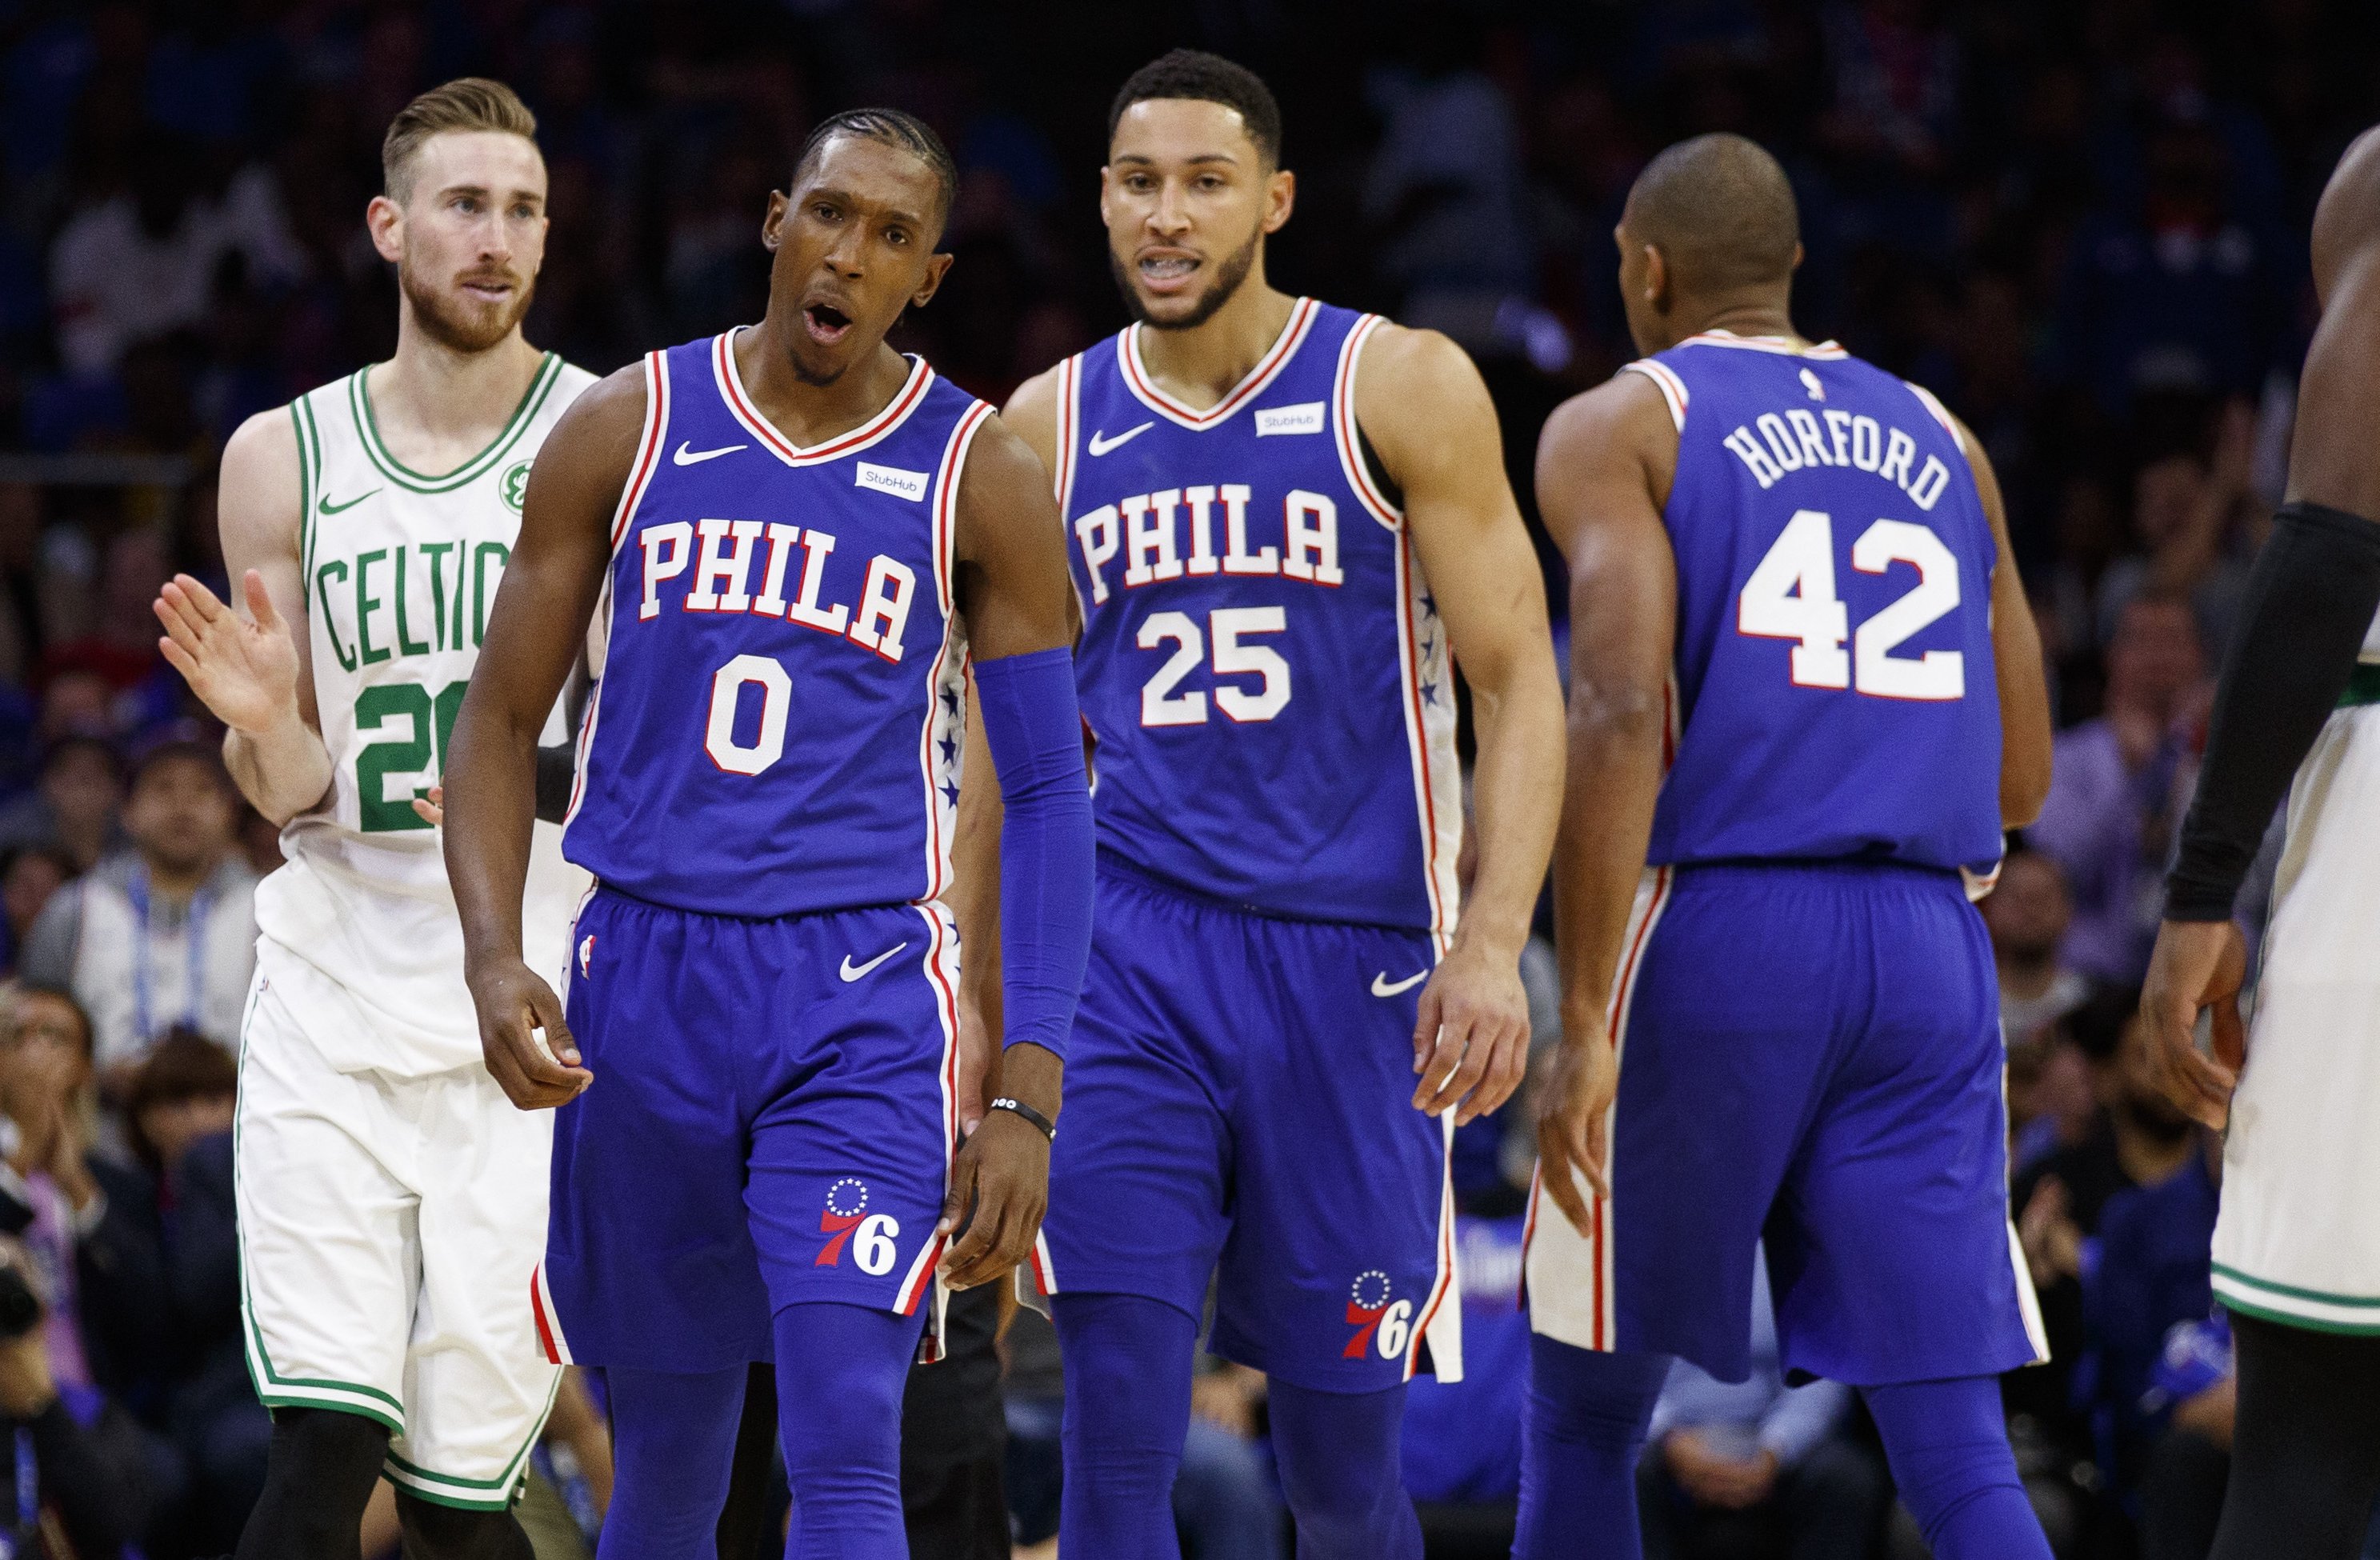 After a shocking departure from Celtics, Al Horford preps for playoff  matchup amid struggles with 76ers - The Boston Globe